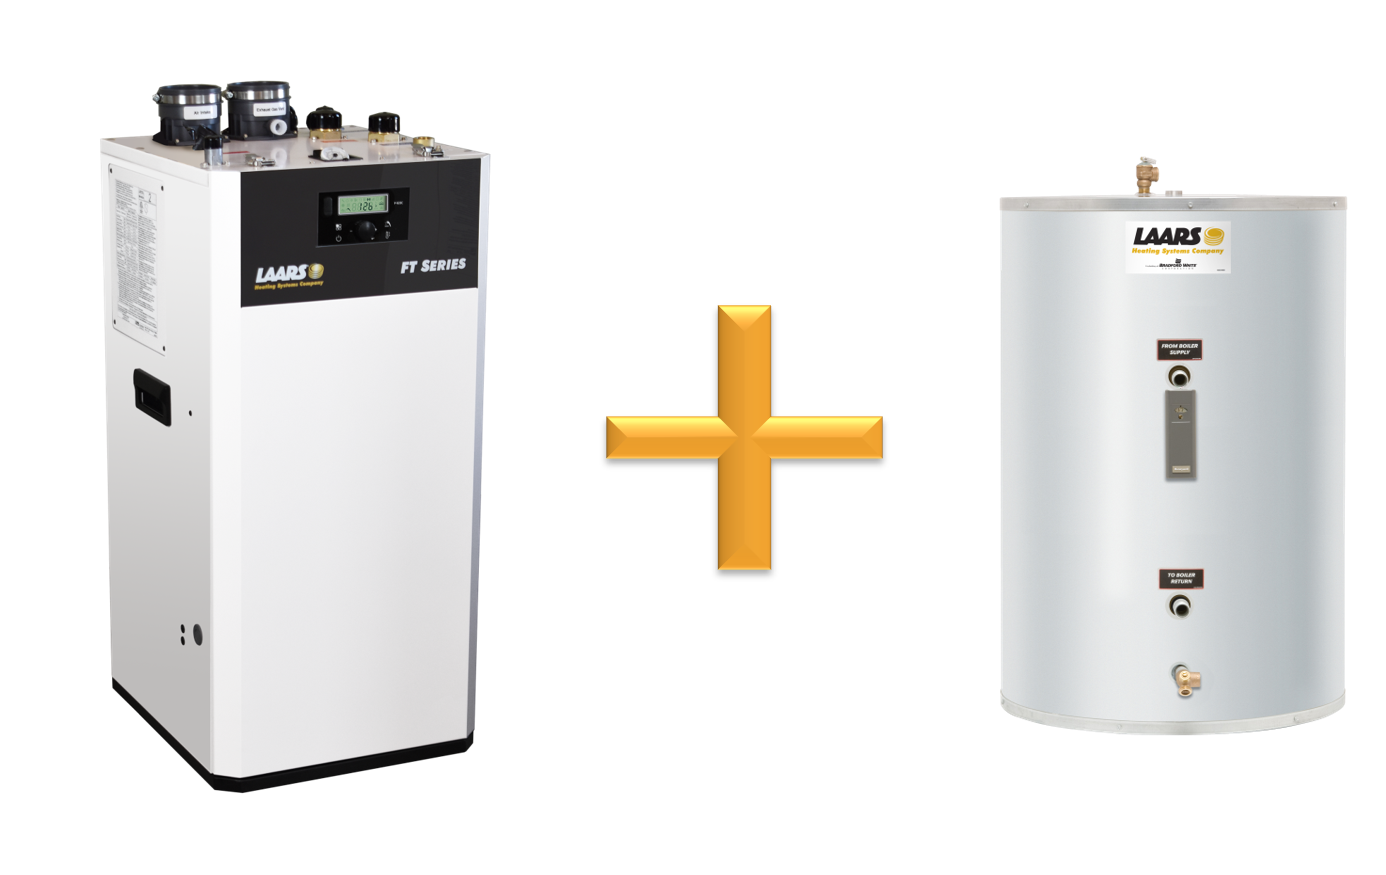 FT Series Floor Boiler paired with Laars-Stor Indirect water heater